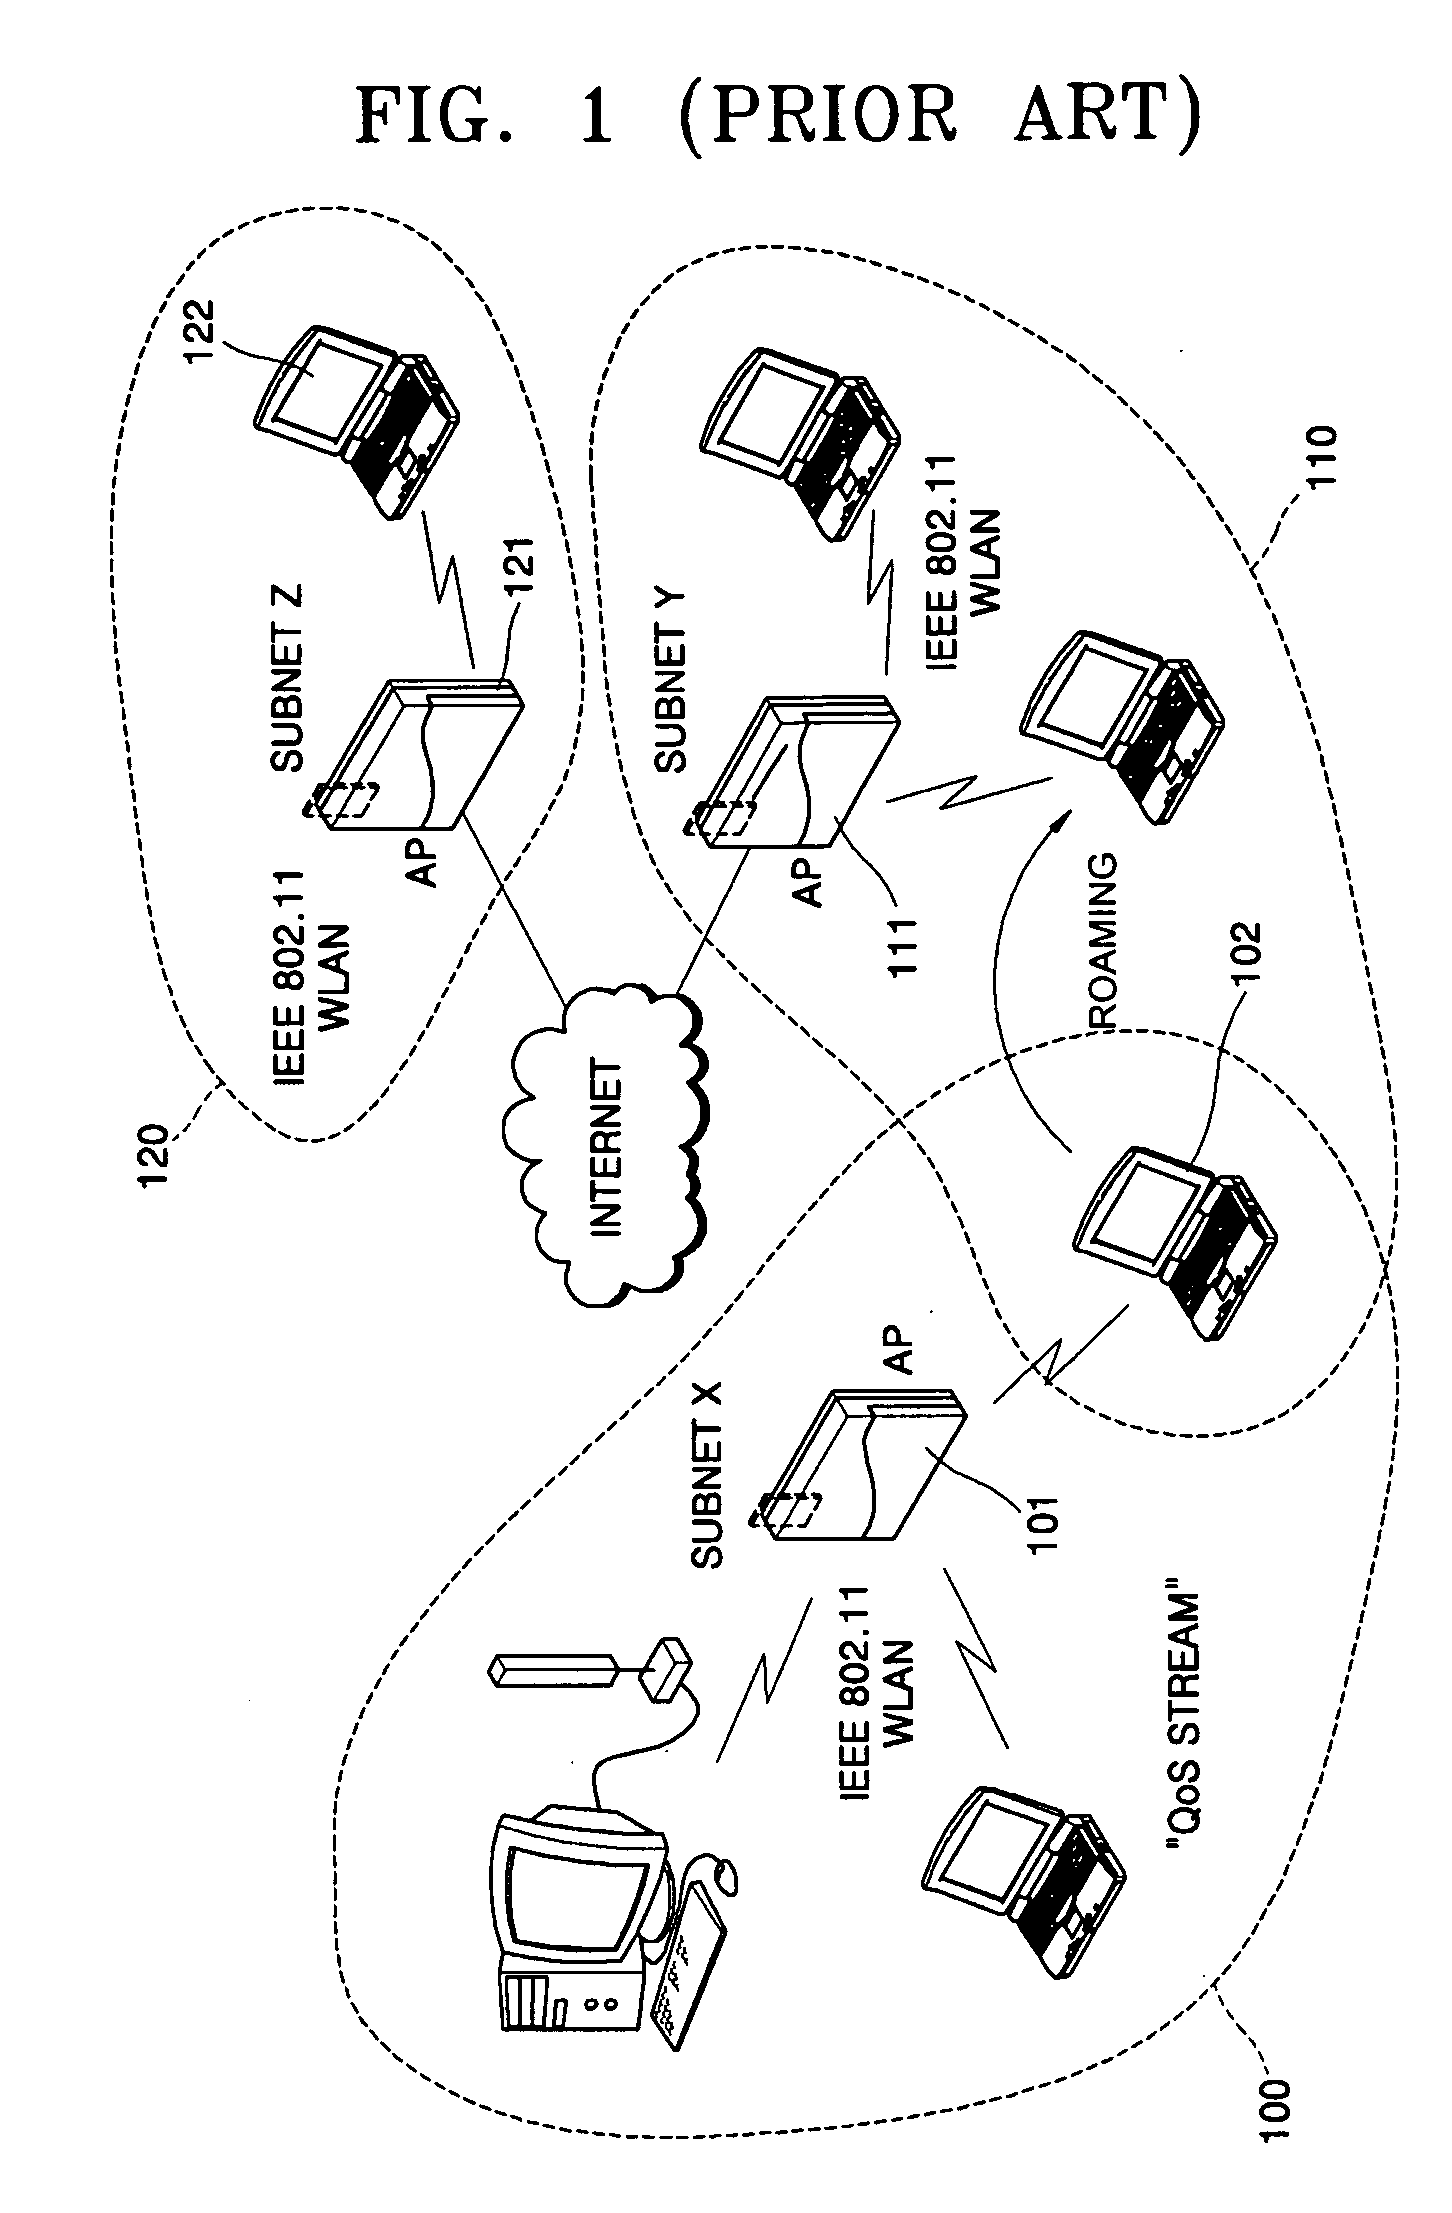 Method and mobile device for performing fast hand-over in WLAN and method of switching services using GPS information